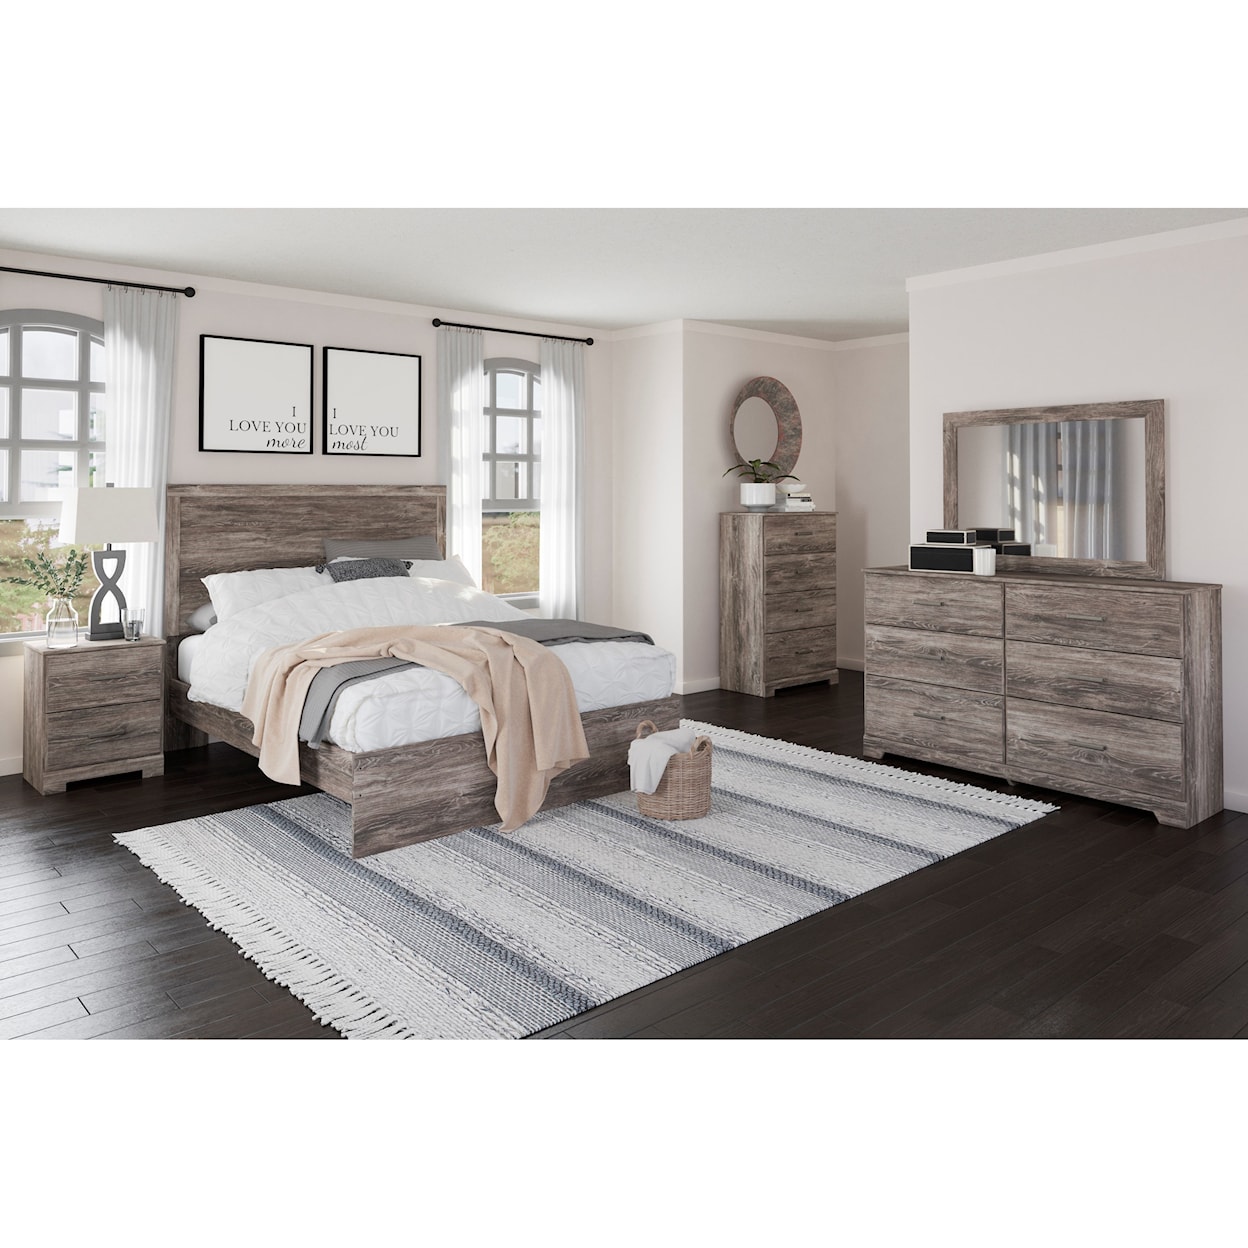 Signature Design by Ashley Ralinski Queen Bedroom Group